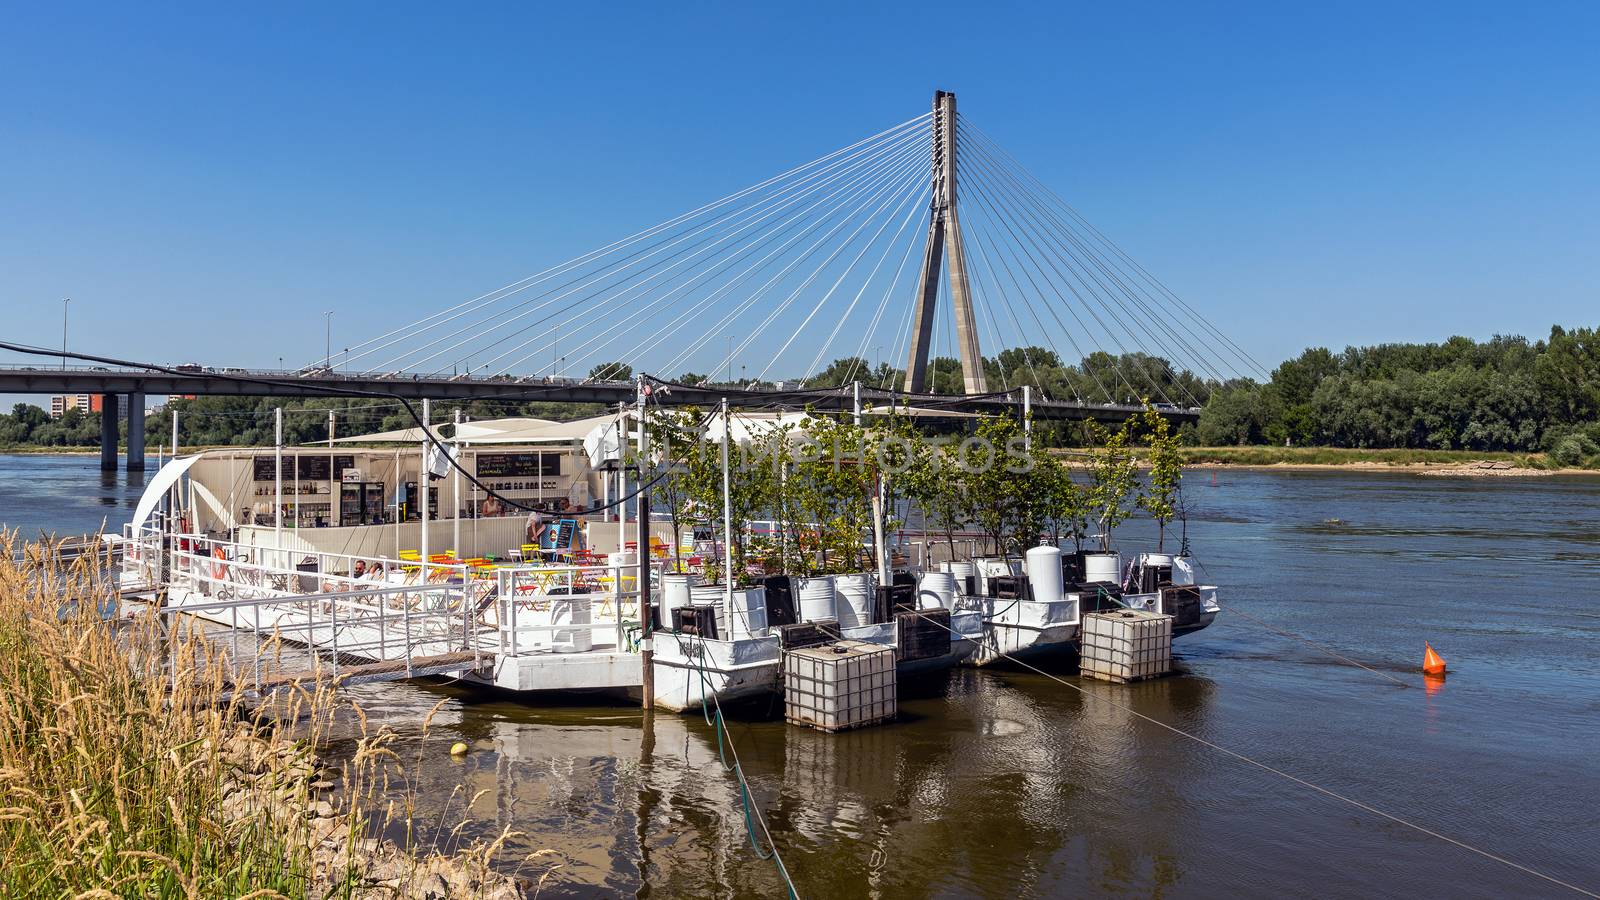 The Swietokrzyski Bridge over Vistula river in Warsaw preceded by the floating restaurant, first modern cable-stayed bridge in Warsaw, 479 m long with the tower 90 m high.